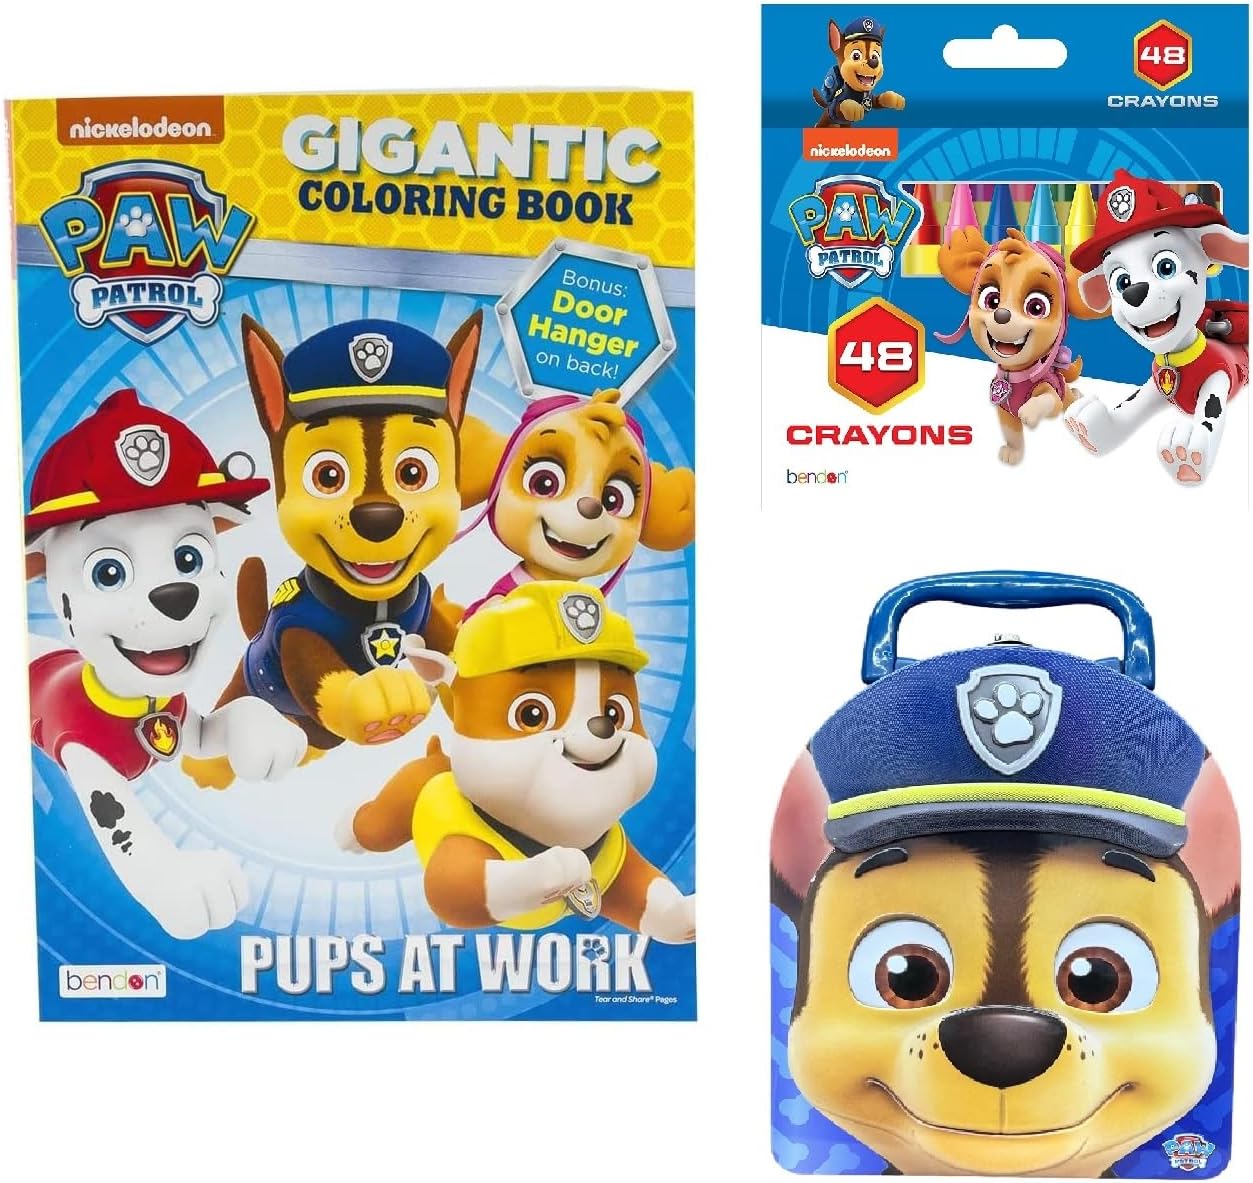 Paw Patrol Coloring Book Gift Set for Kids with 192 Coloring Pages